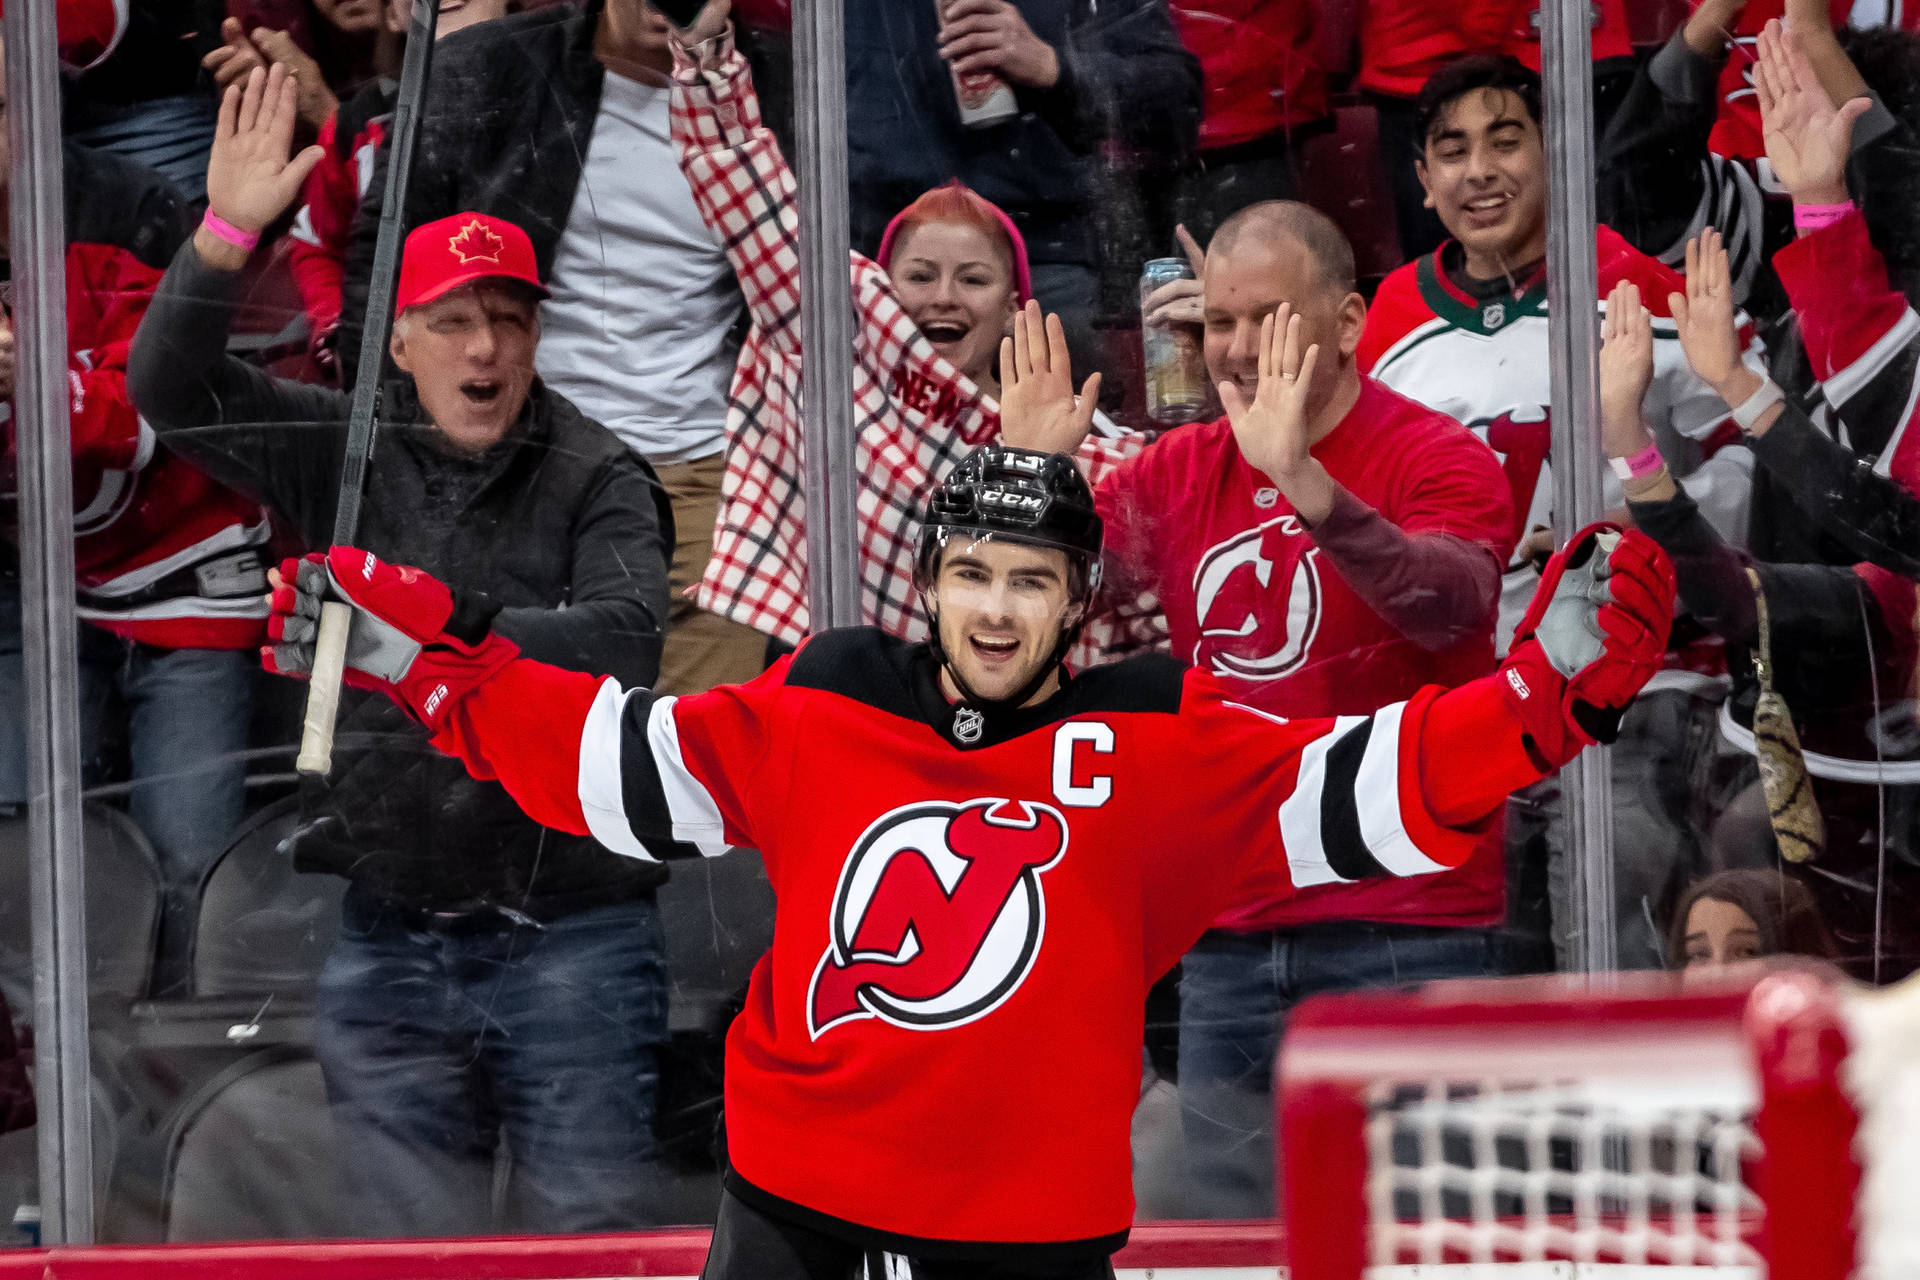 Exciting Moments with NJ Devils Player Wallpaper